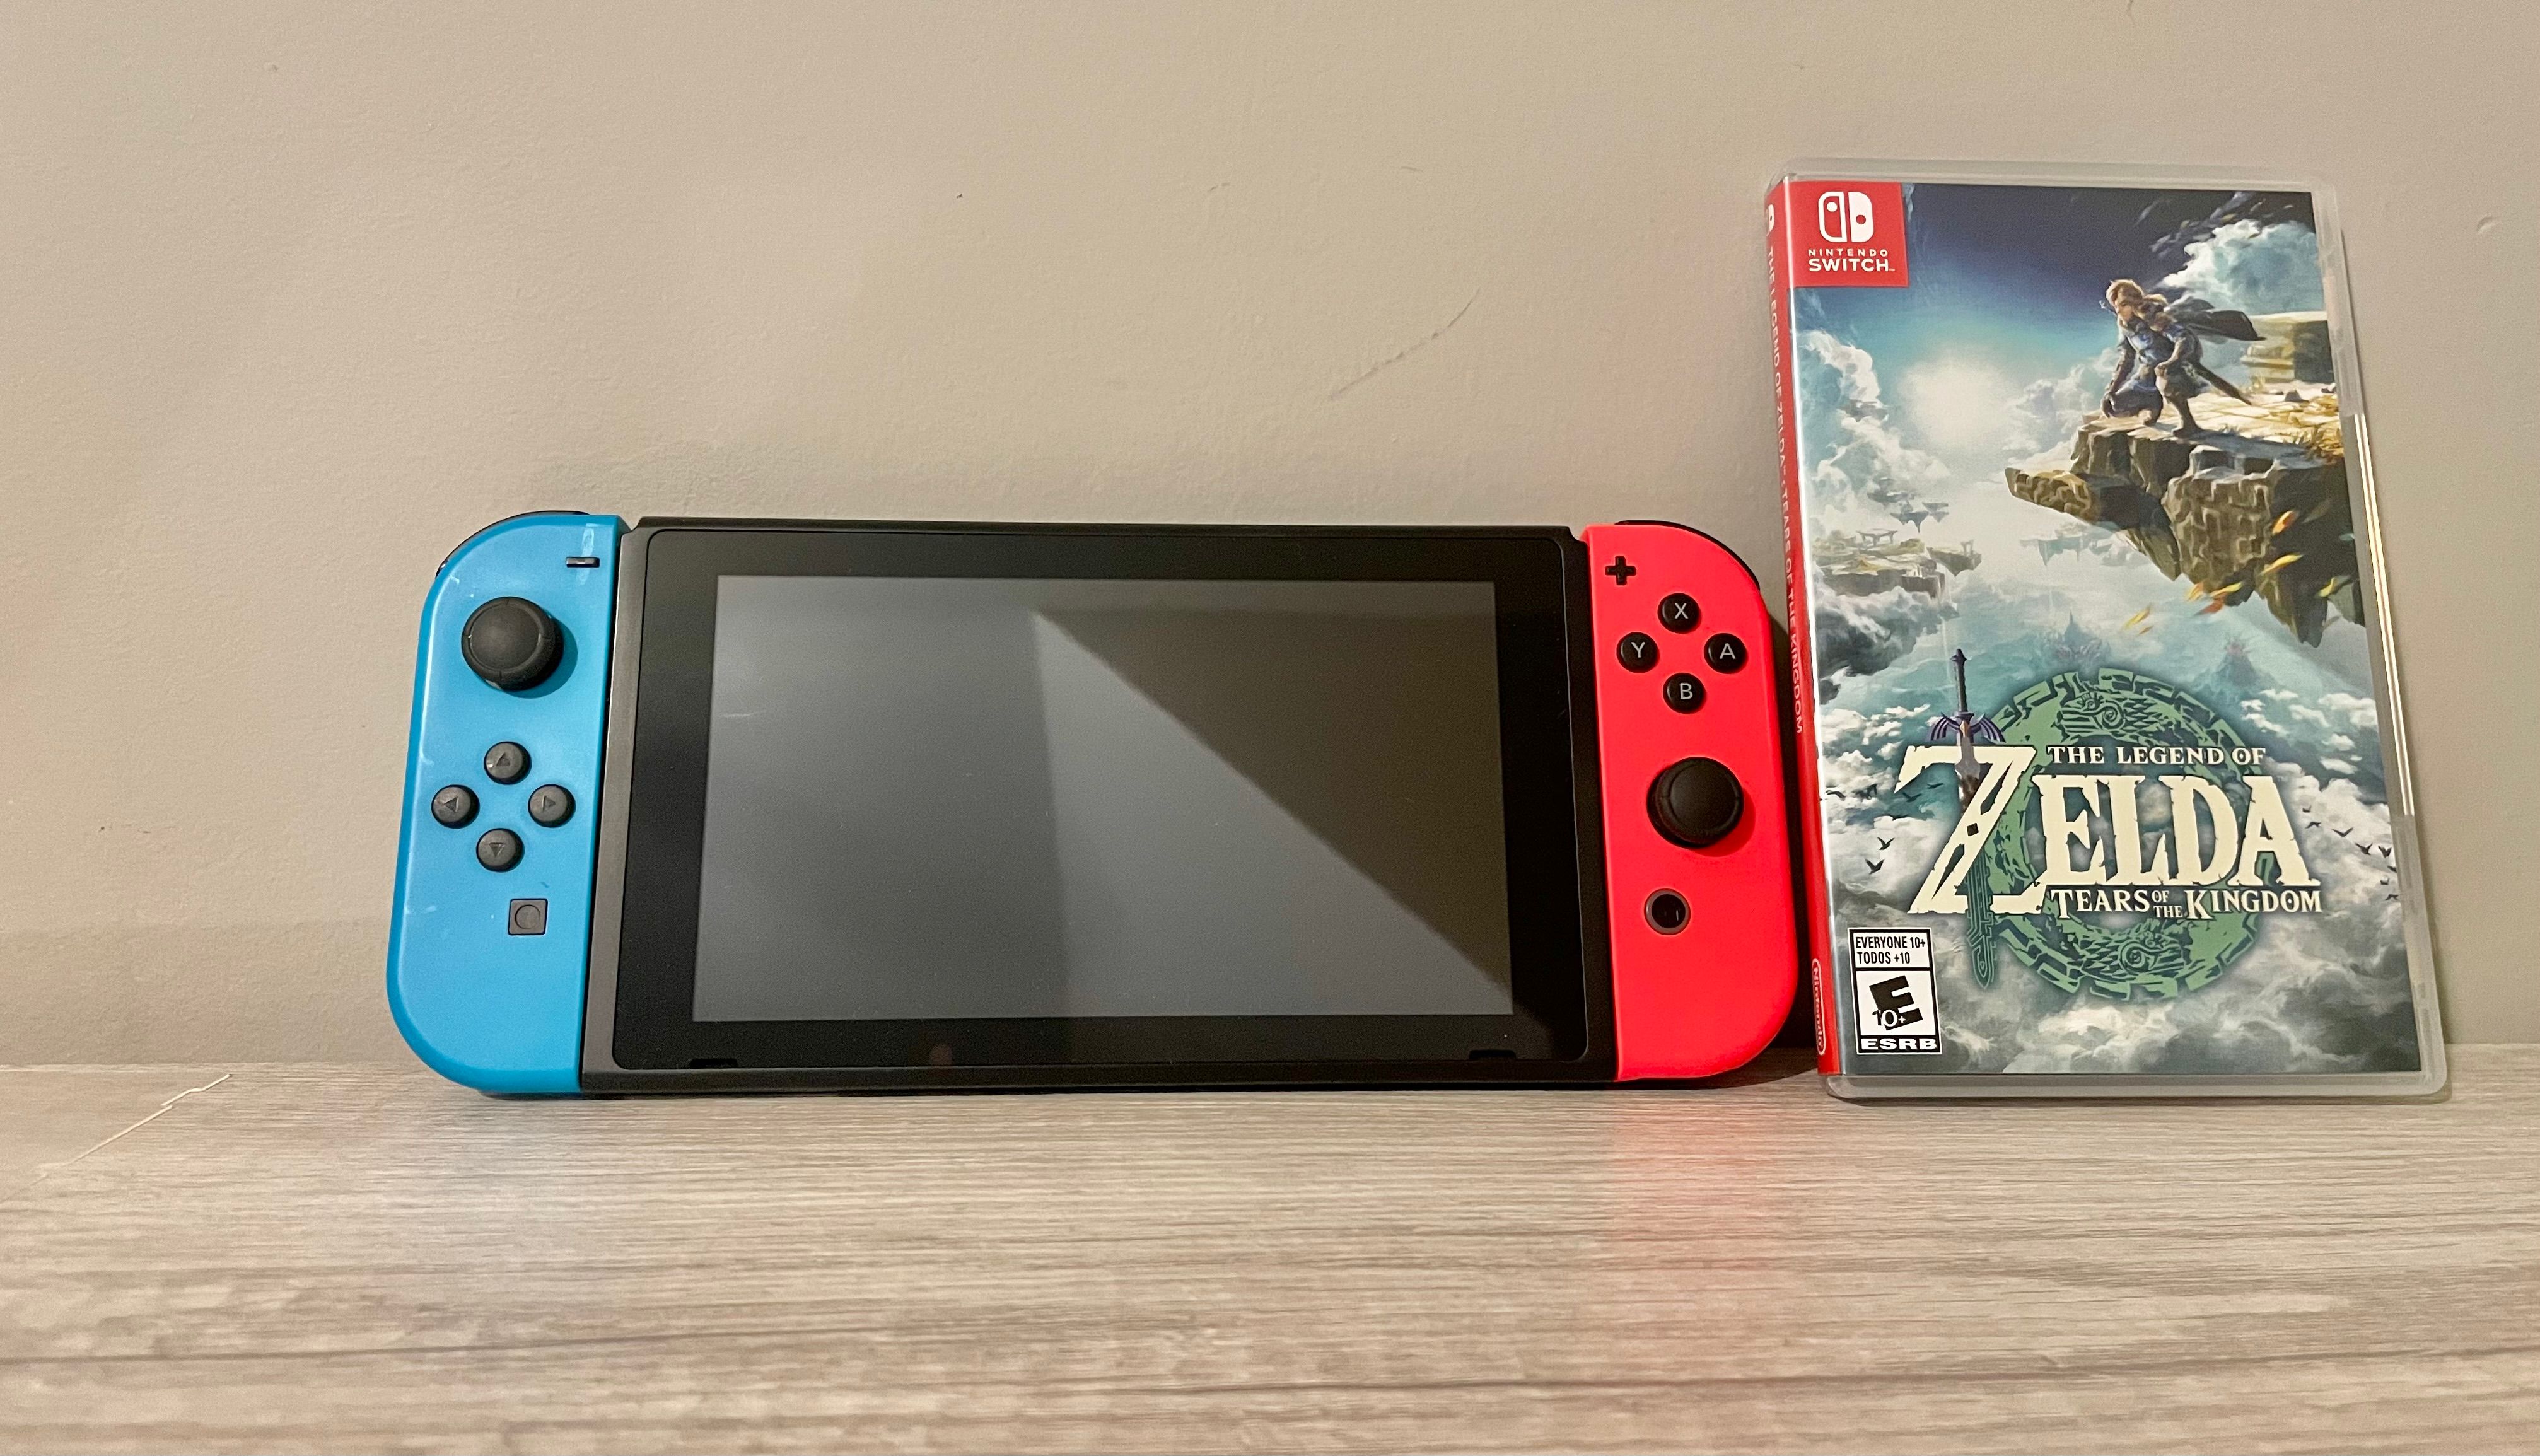 A photograph of a Nintendo Switch console next to a game case for The Legend of Zelda Tears of the Kingdom